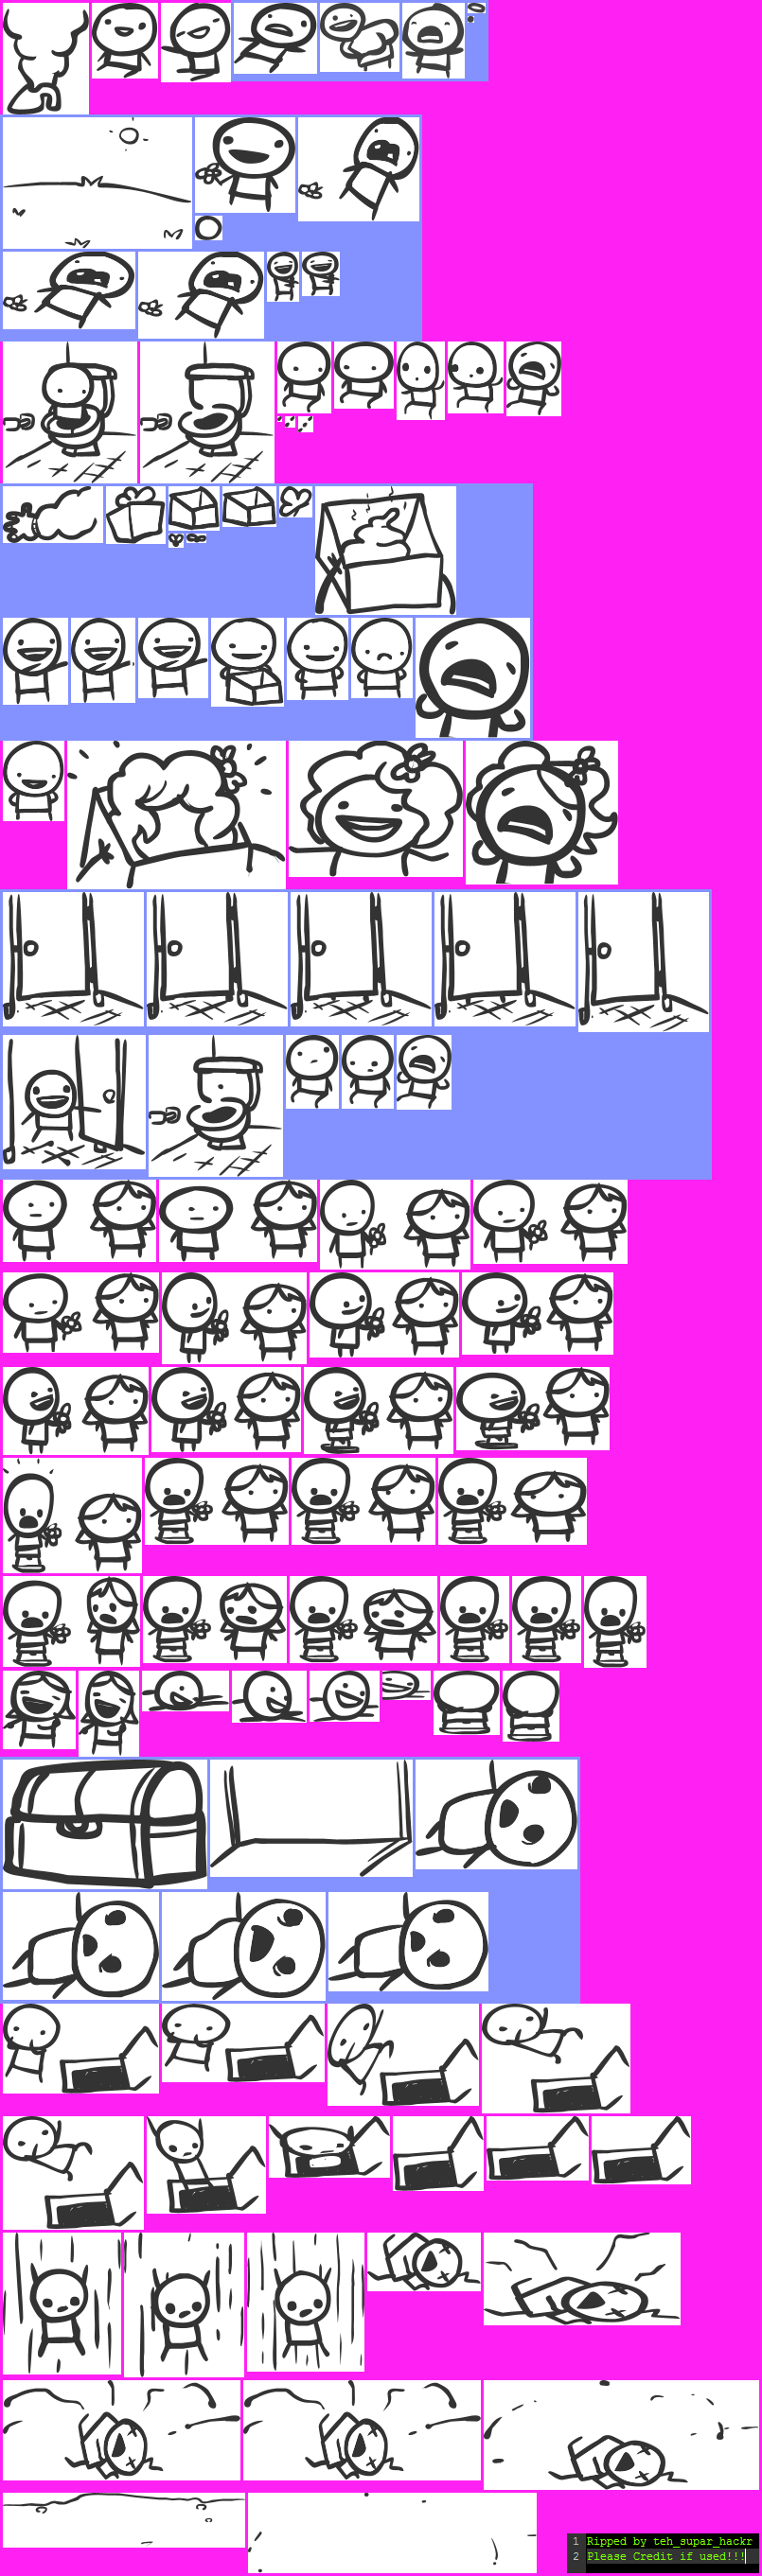 The Binding of Isaac - Nightmare Sequences